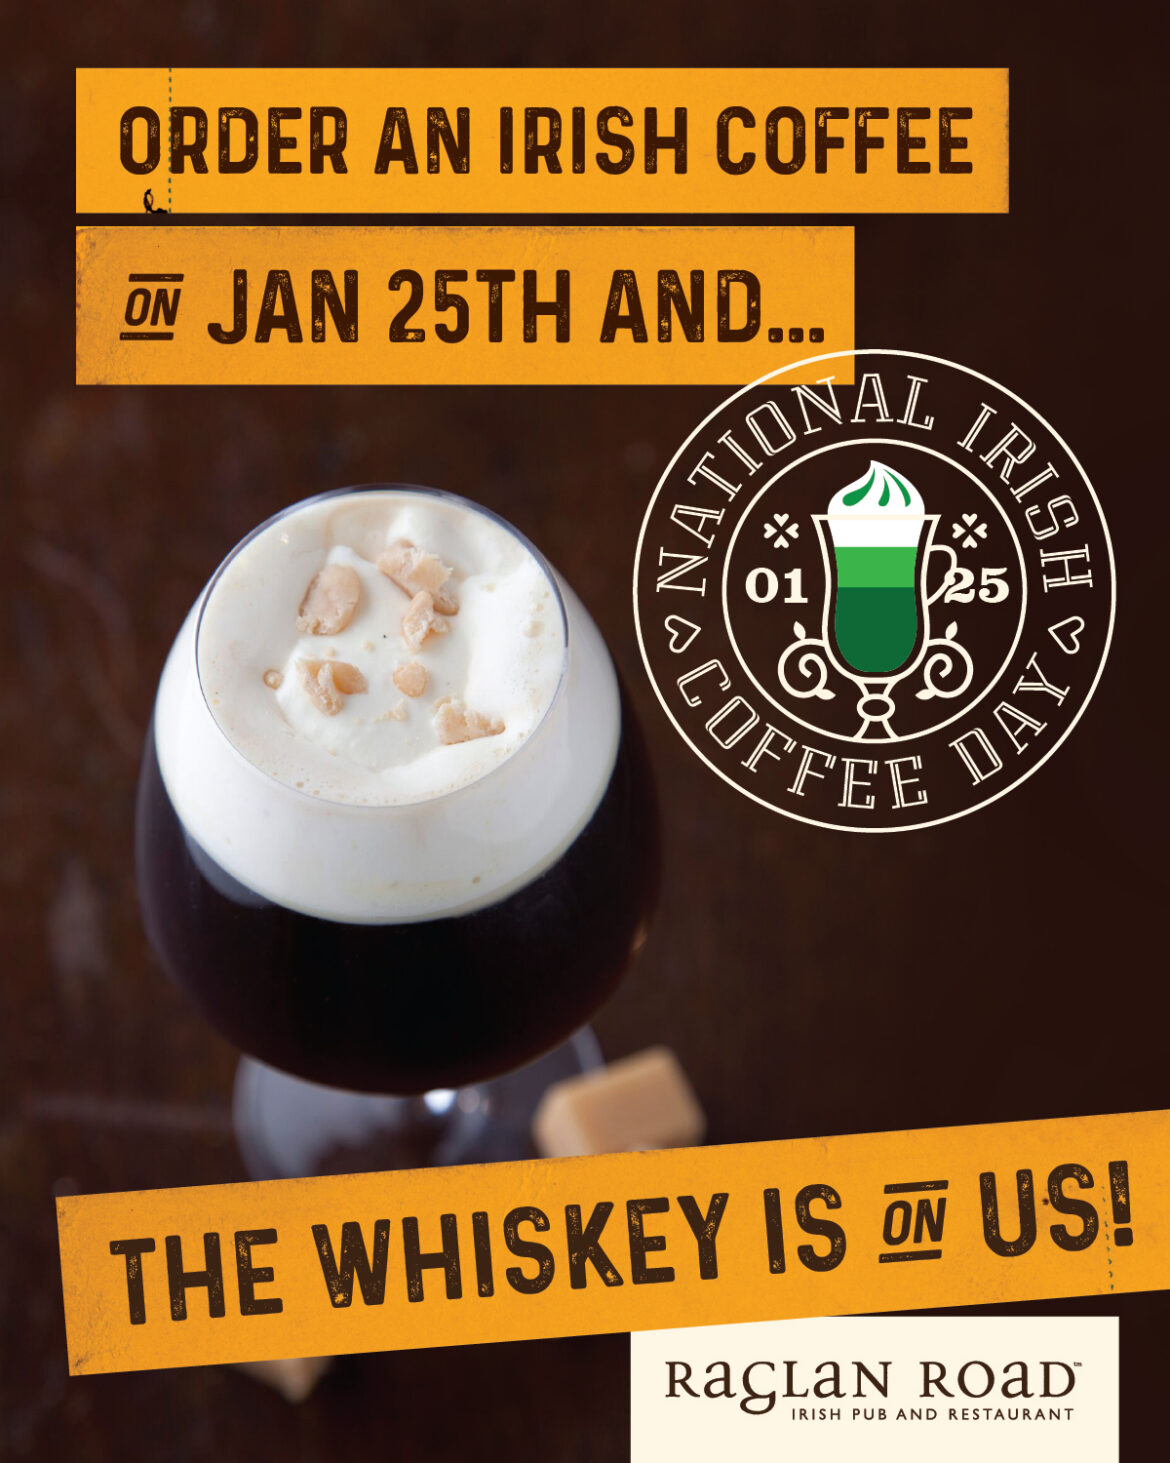 Raglan Road’s National Irish Coffee Day Jan. 25th with a Special Offer